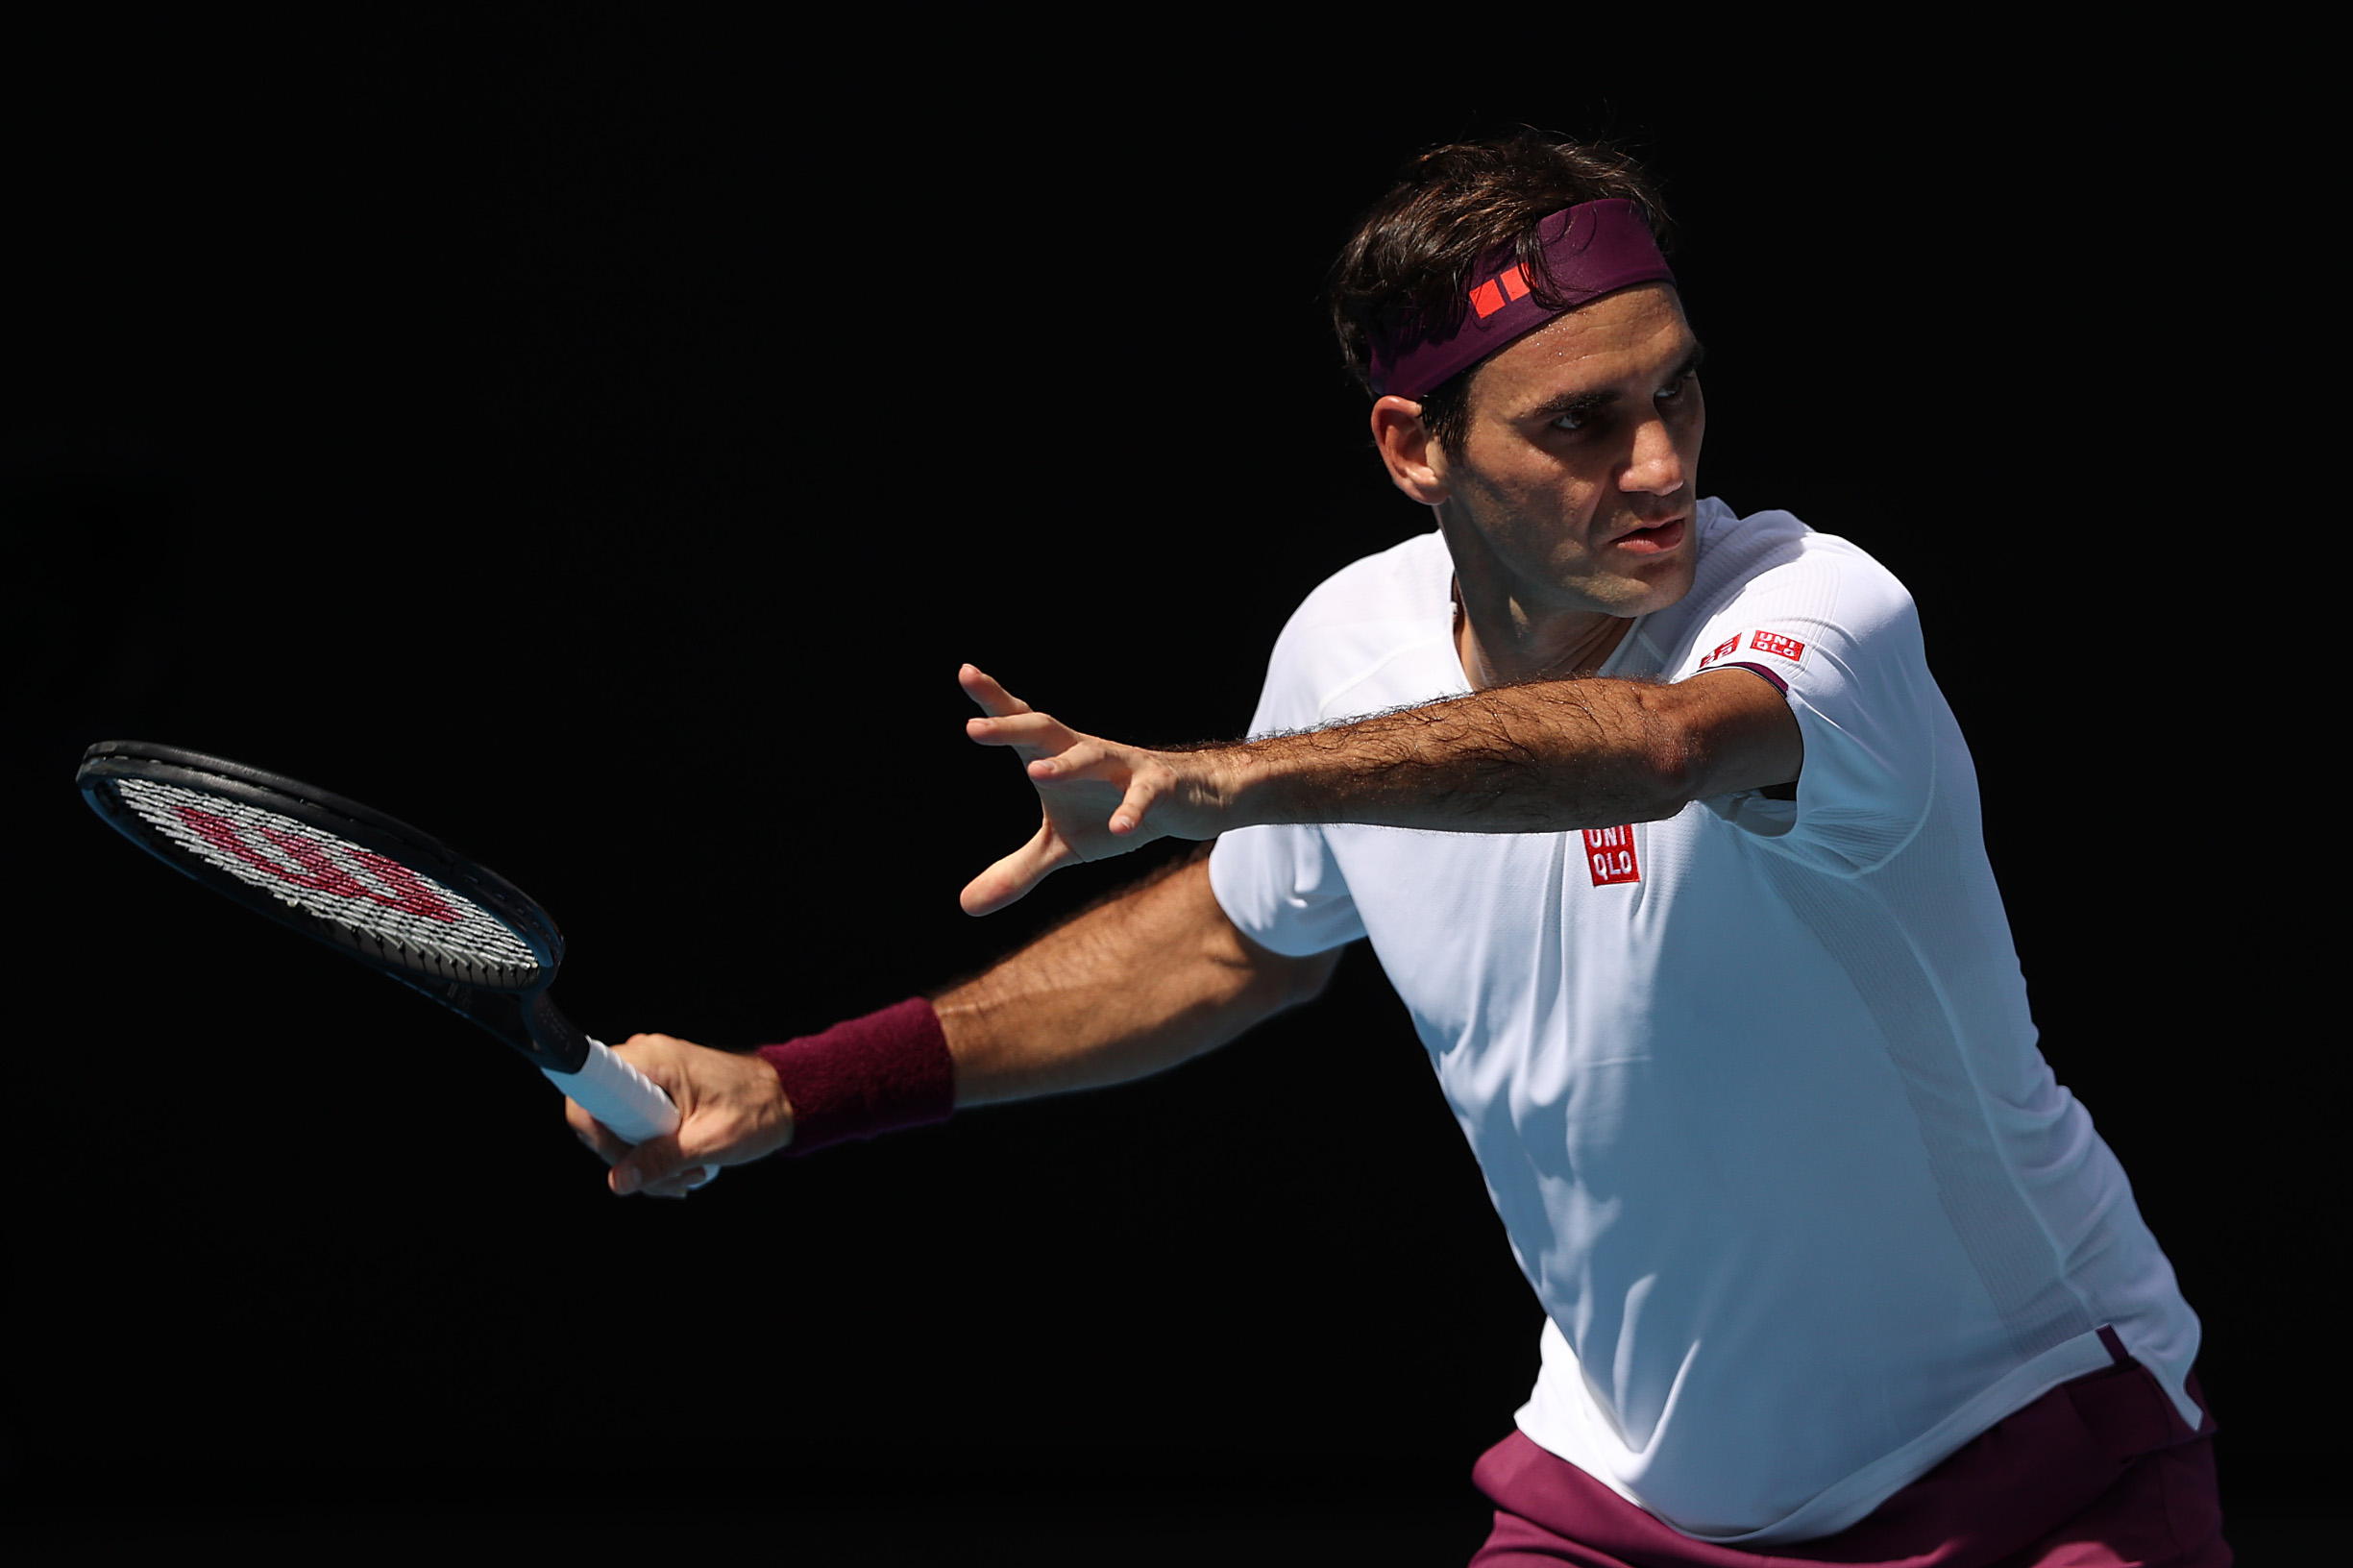 MELBOURNE, AUSTRALIA - JANUARY 28: Roger Federer of Switzerland plays a forehand during his Men’s Singles Quarterfinal match against Tennys Sandgren of the United States on day nine of the 2020 Australian Open at Melbourne Park on January 28, 2020 in Melbourne, Australia. (Photo by Clive Brunskill/Getty Images)